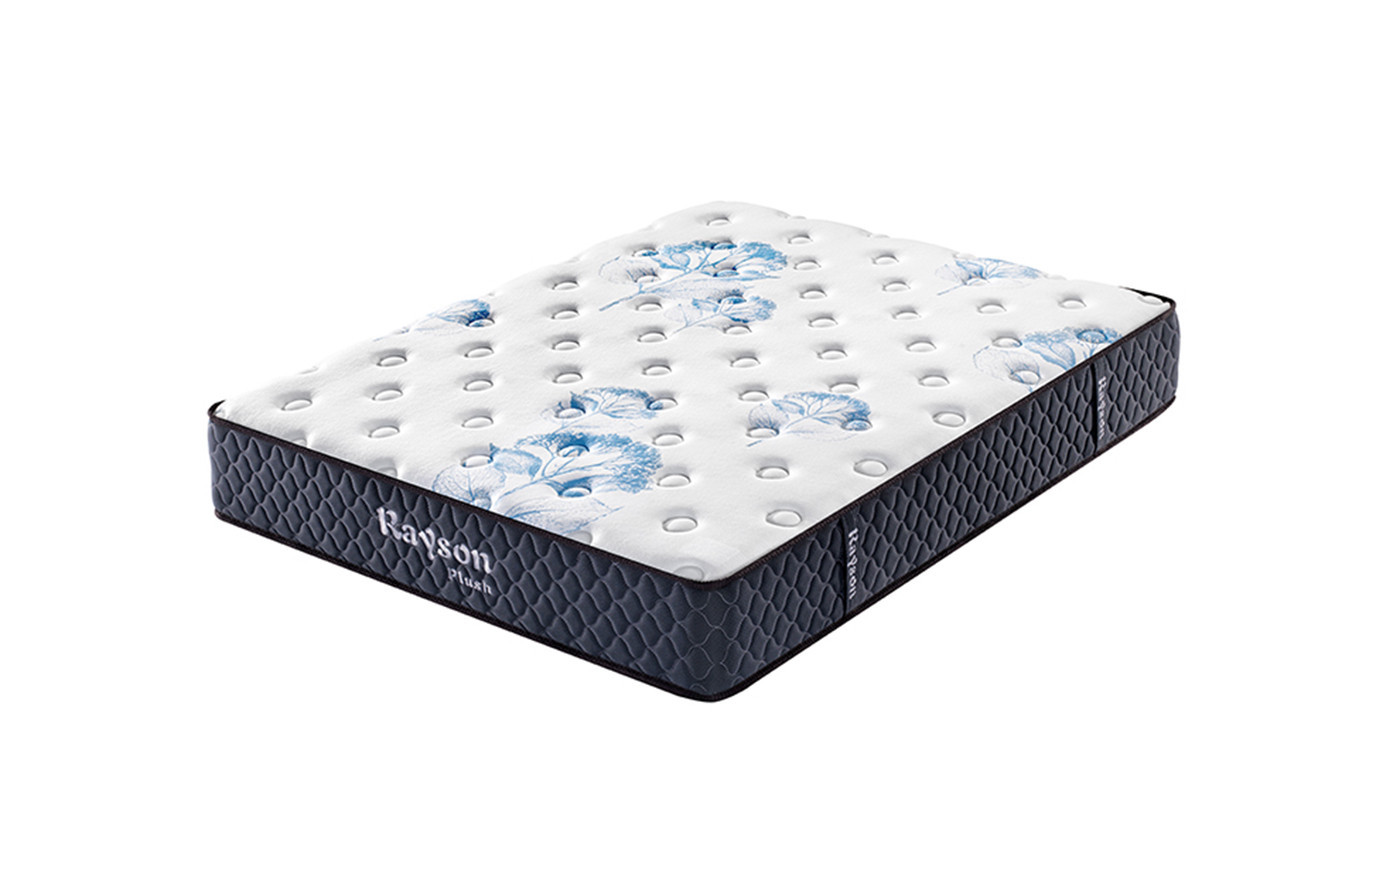 Synwin knitted fabric full memory foam mattress bulk order with pocket spring